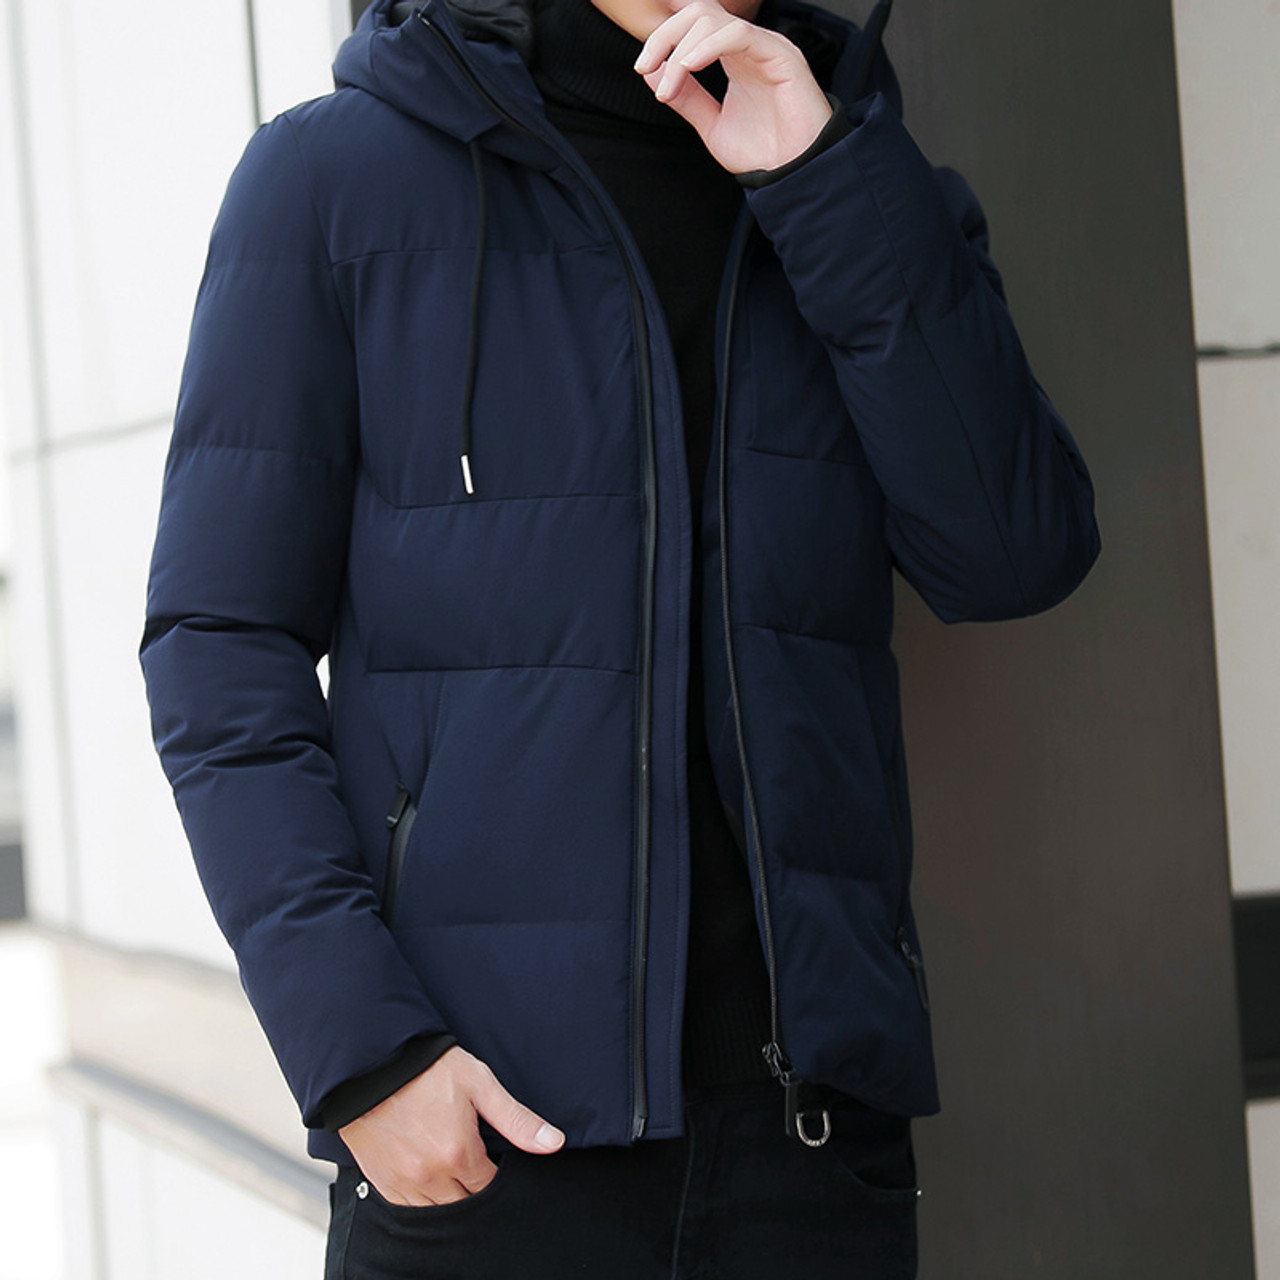 Hm Plus Size Men Winter Jacket With Medium Length Hood And Thicken Cotton  Windbreaker Coat #1023 A#733 From Finebeautyone, $38.13 | DHgate.Com